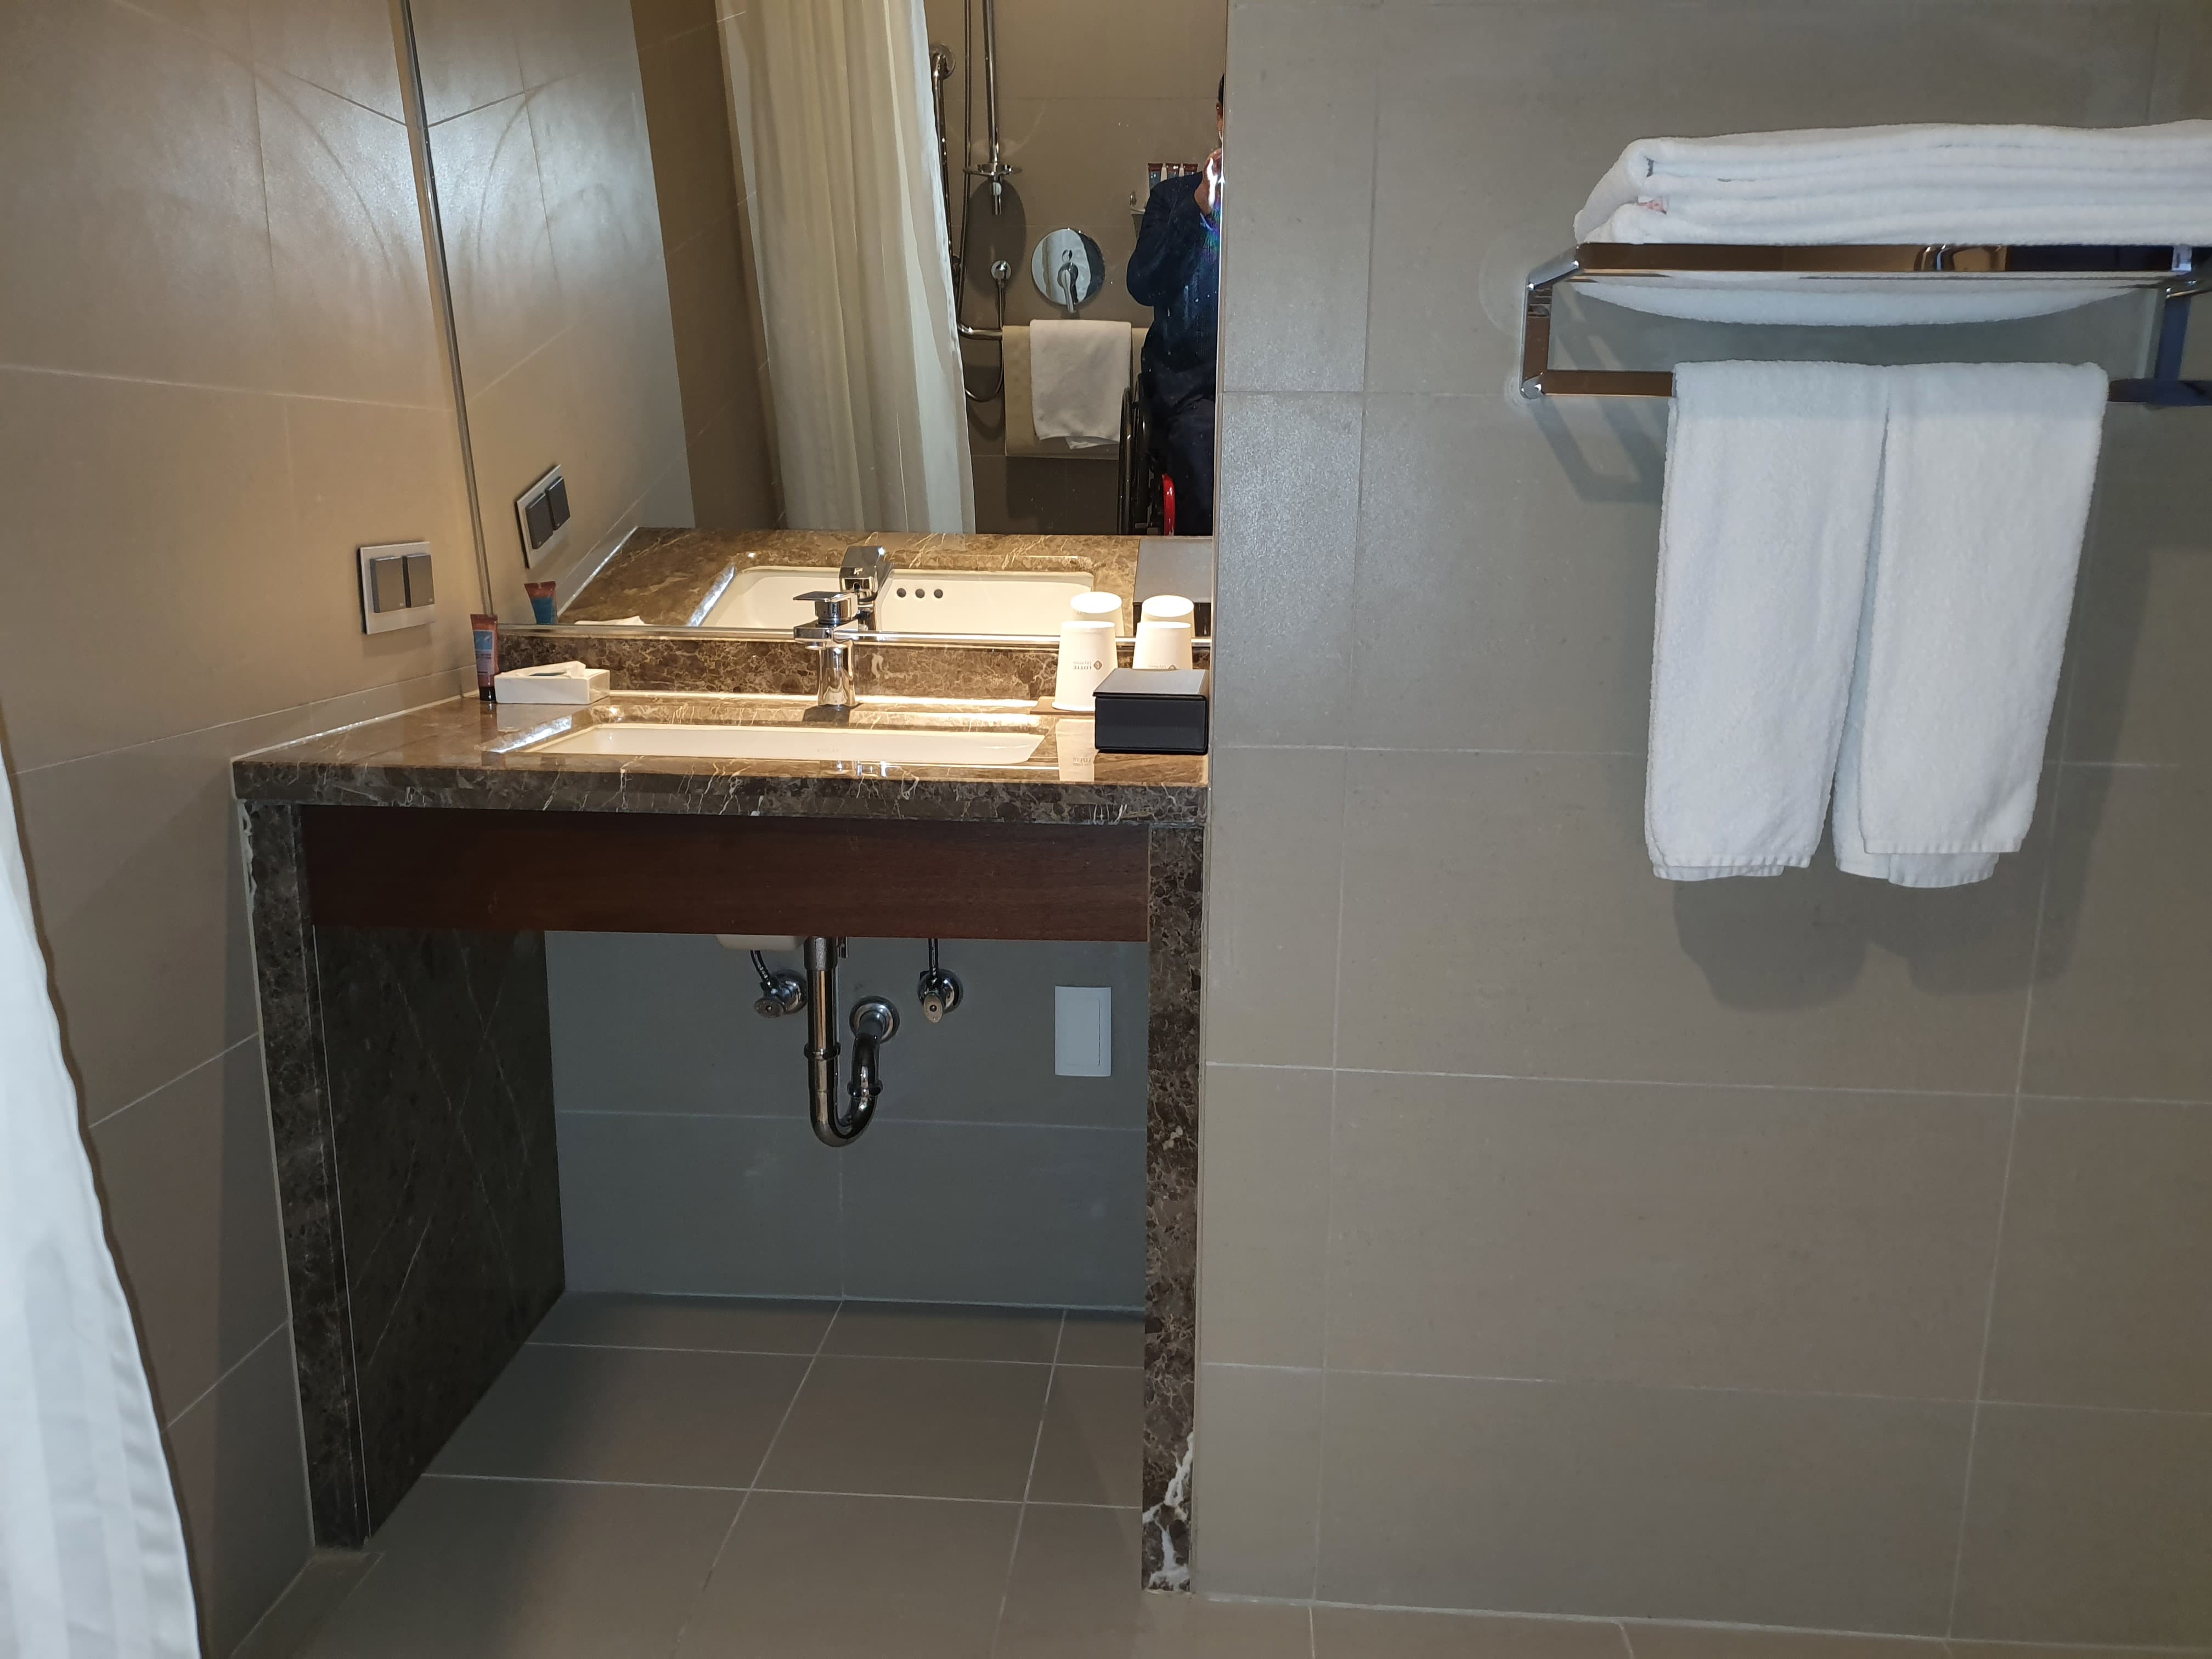 Roll-in shower in the guest room0 : A bathroom sink with large under space